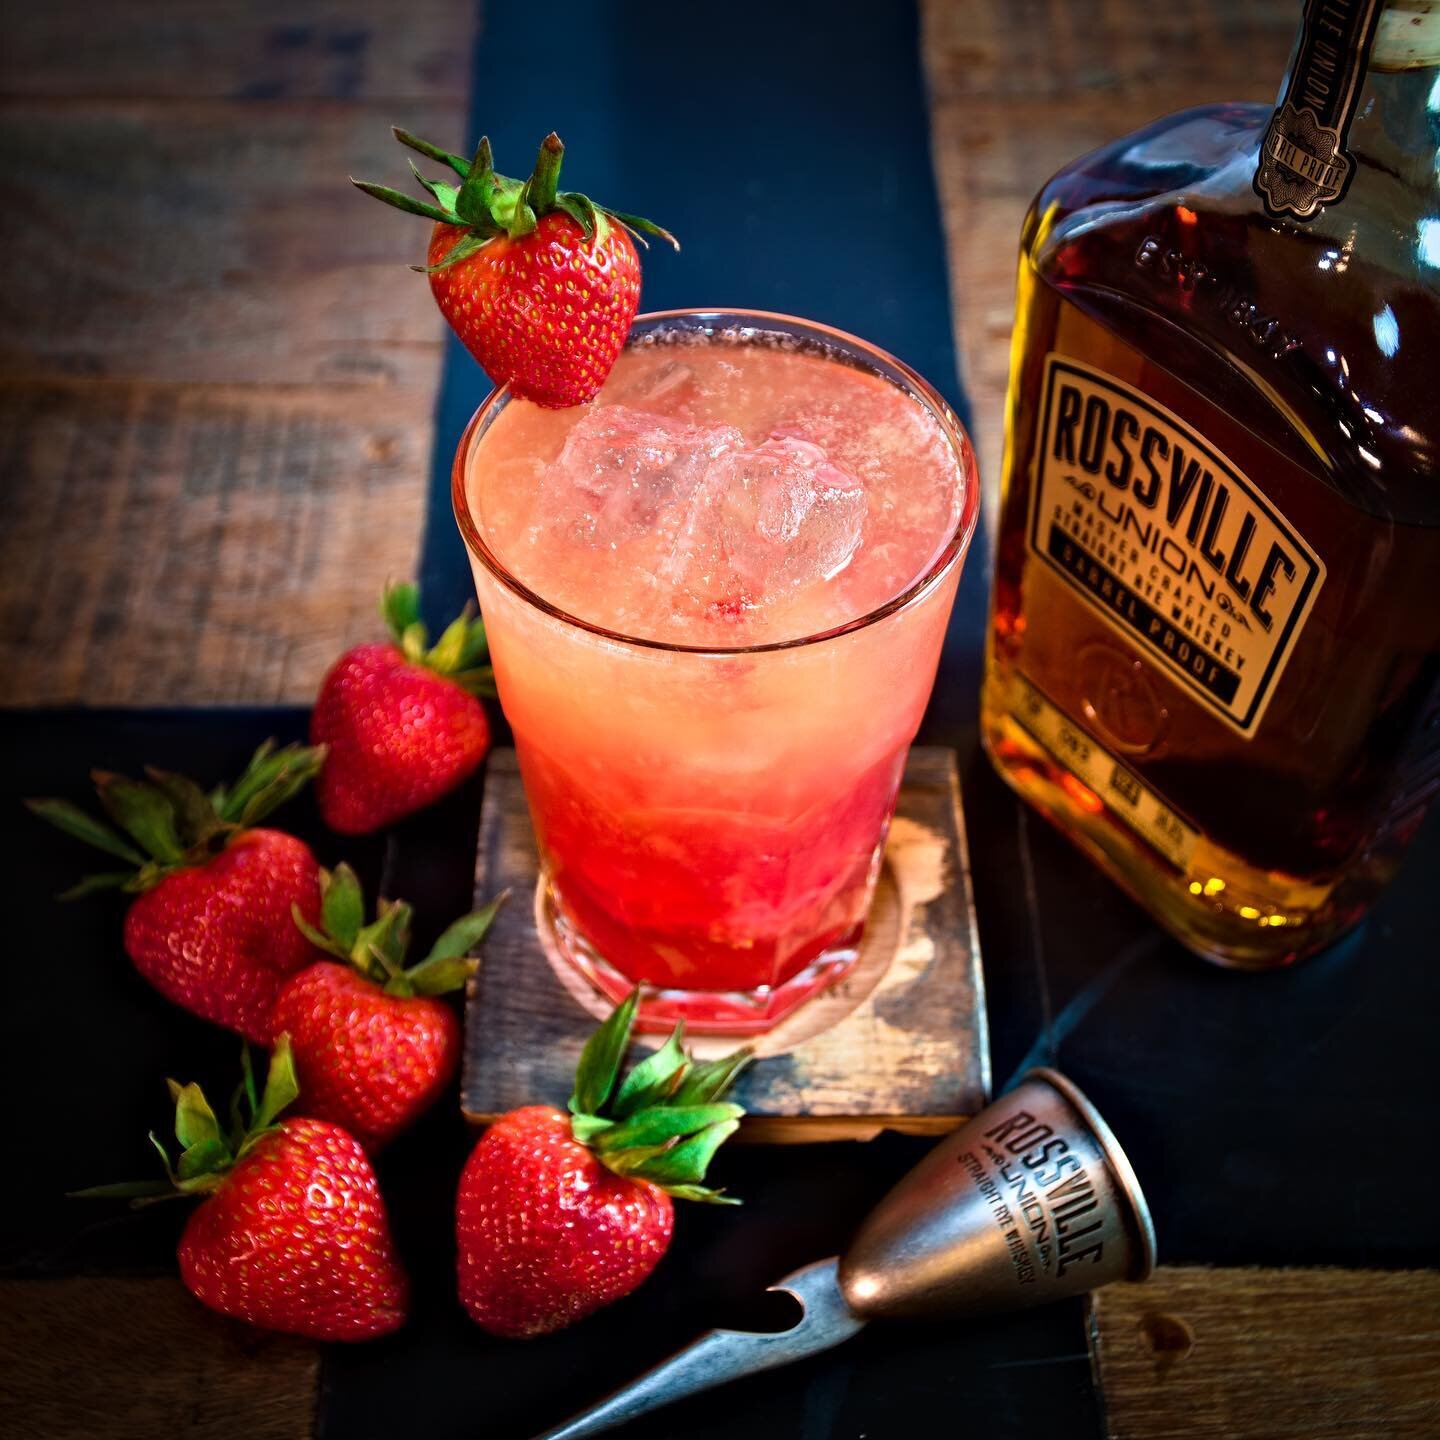 Happy Derby Day! 🐎 I&rsquo;ve teamed with @rossvilleunion to create a derby-inspired cocktail that&rsquo;s a spicy sweet alternative to a mint julep. #RossvilleUnion&rsquo;s Blind Buck | Rossville Union Rye Whiskey, strawberry, lemon juice, simple s